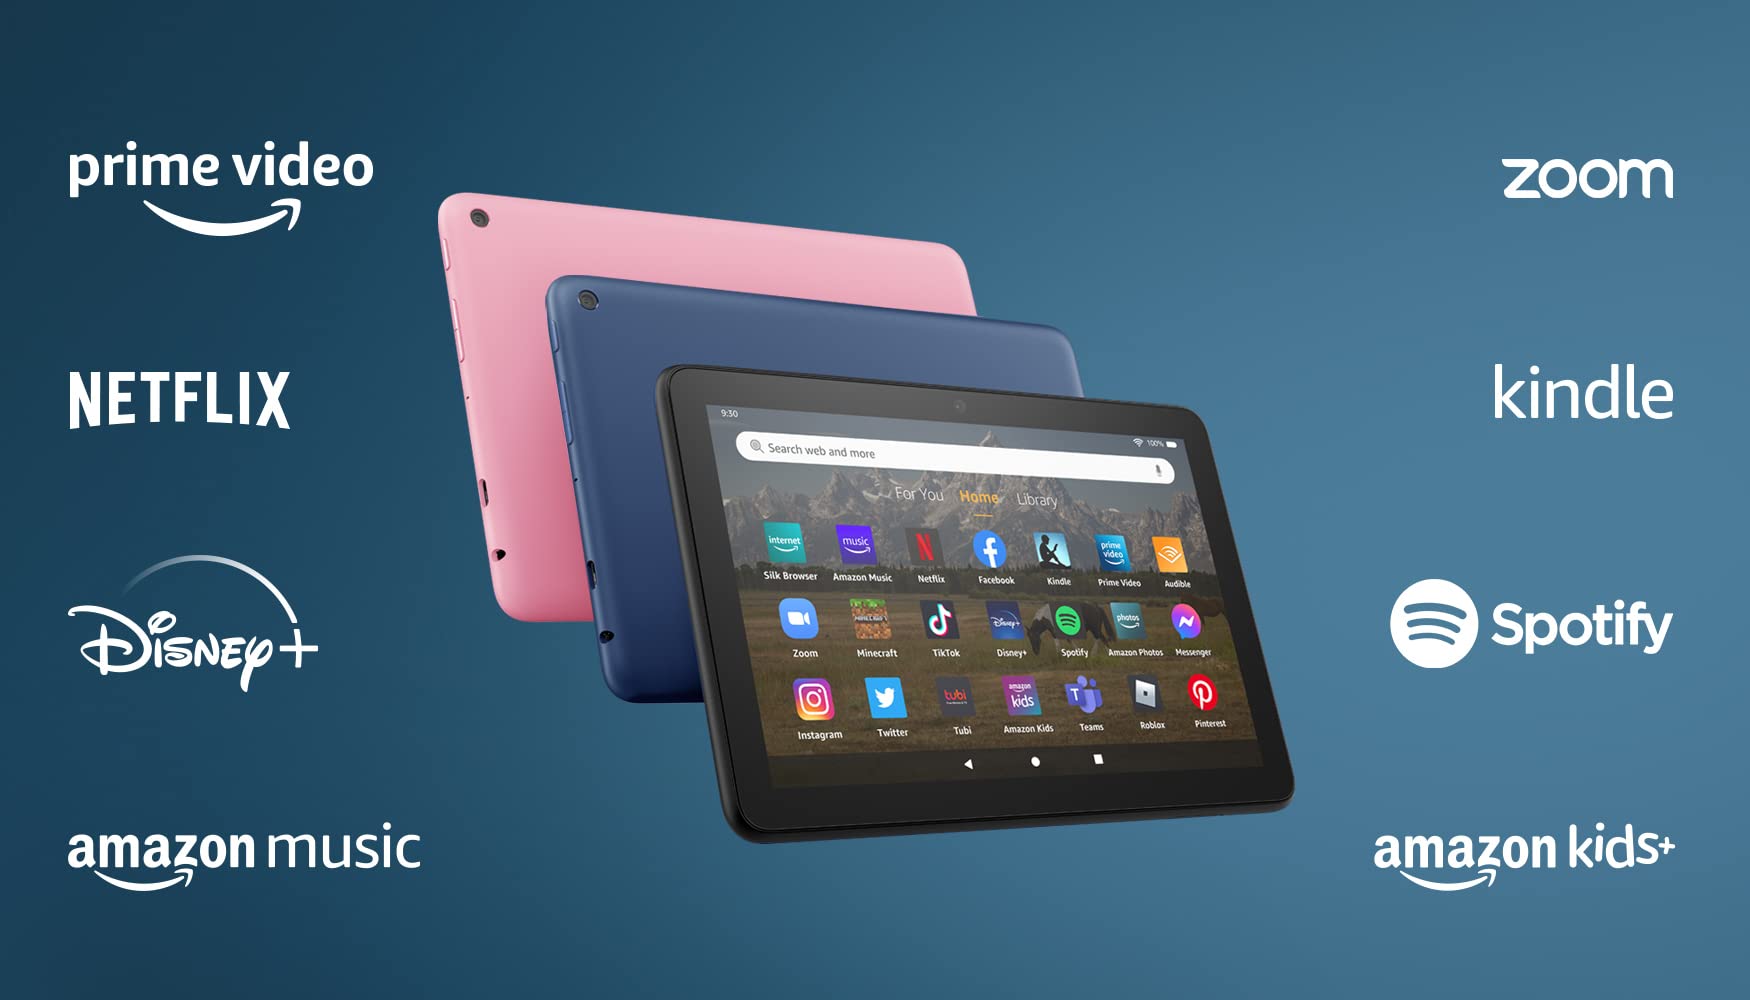 All-new Amazon Fire HD 8 tablet, 8” HD Display, 64 GB, 30% faster processor, designed for portable entertainment, (2022 release), Rose, without lockscreen ads